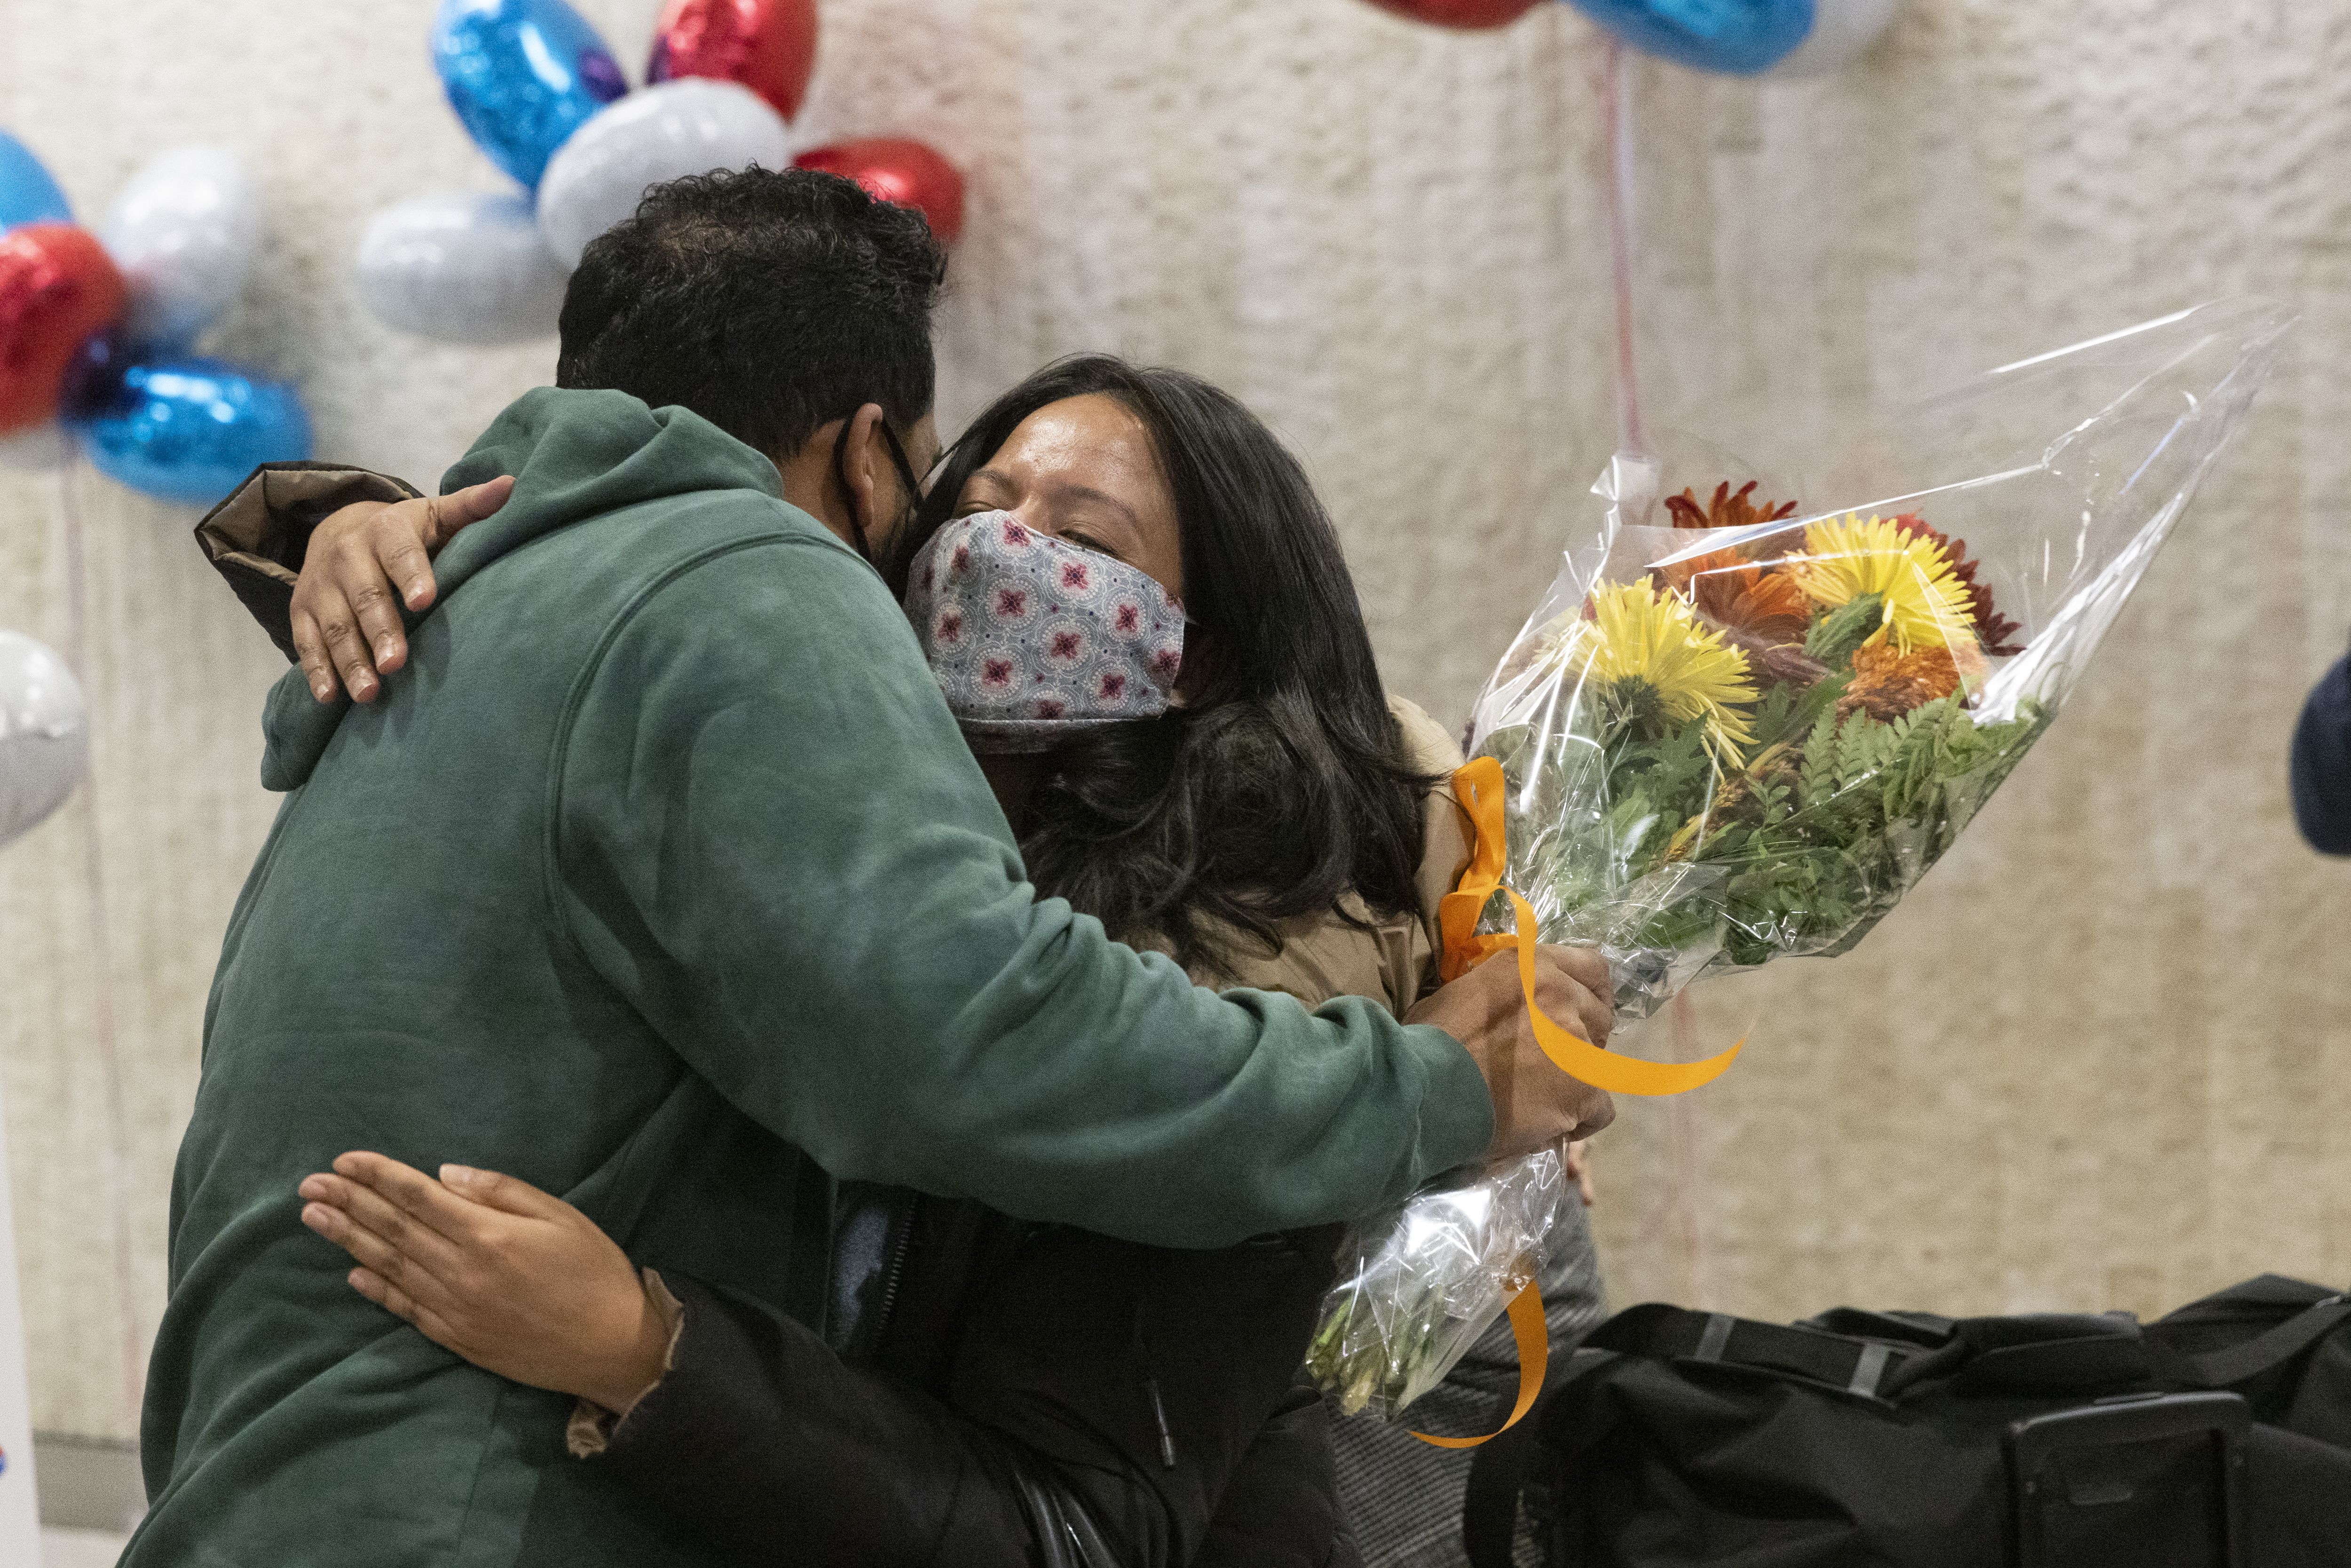 A man and woman hug at JFK arrivals area